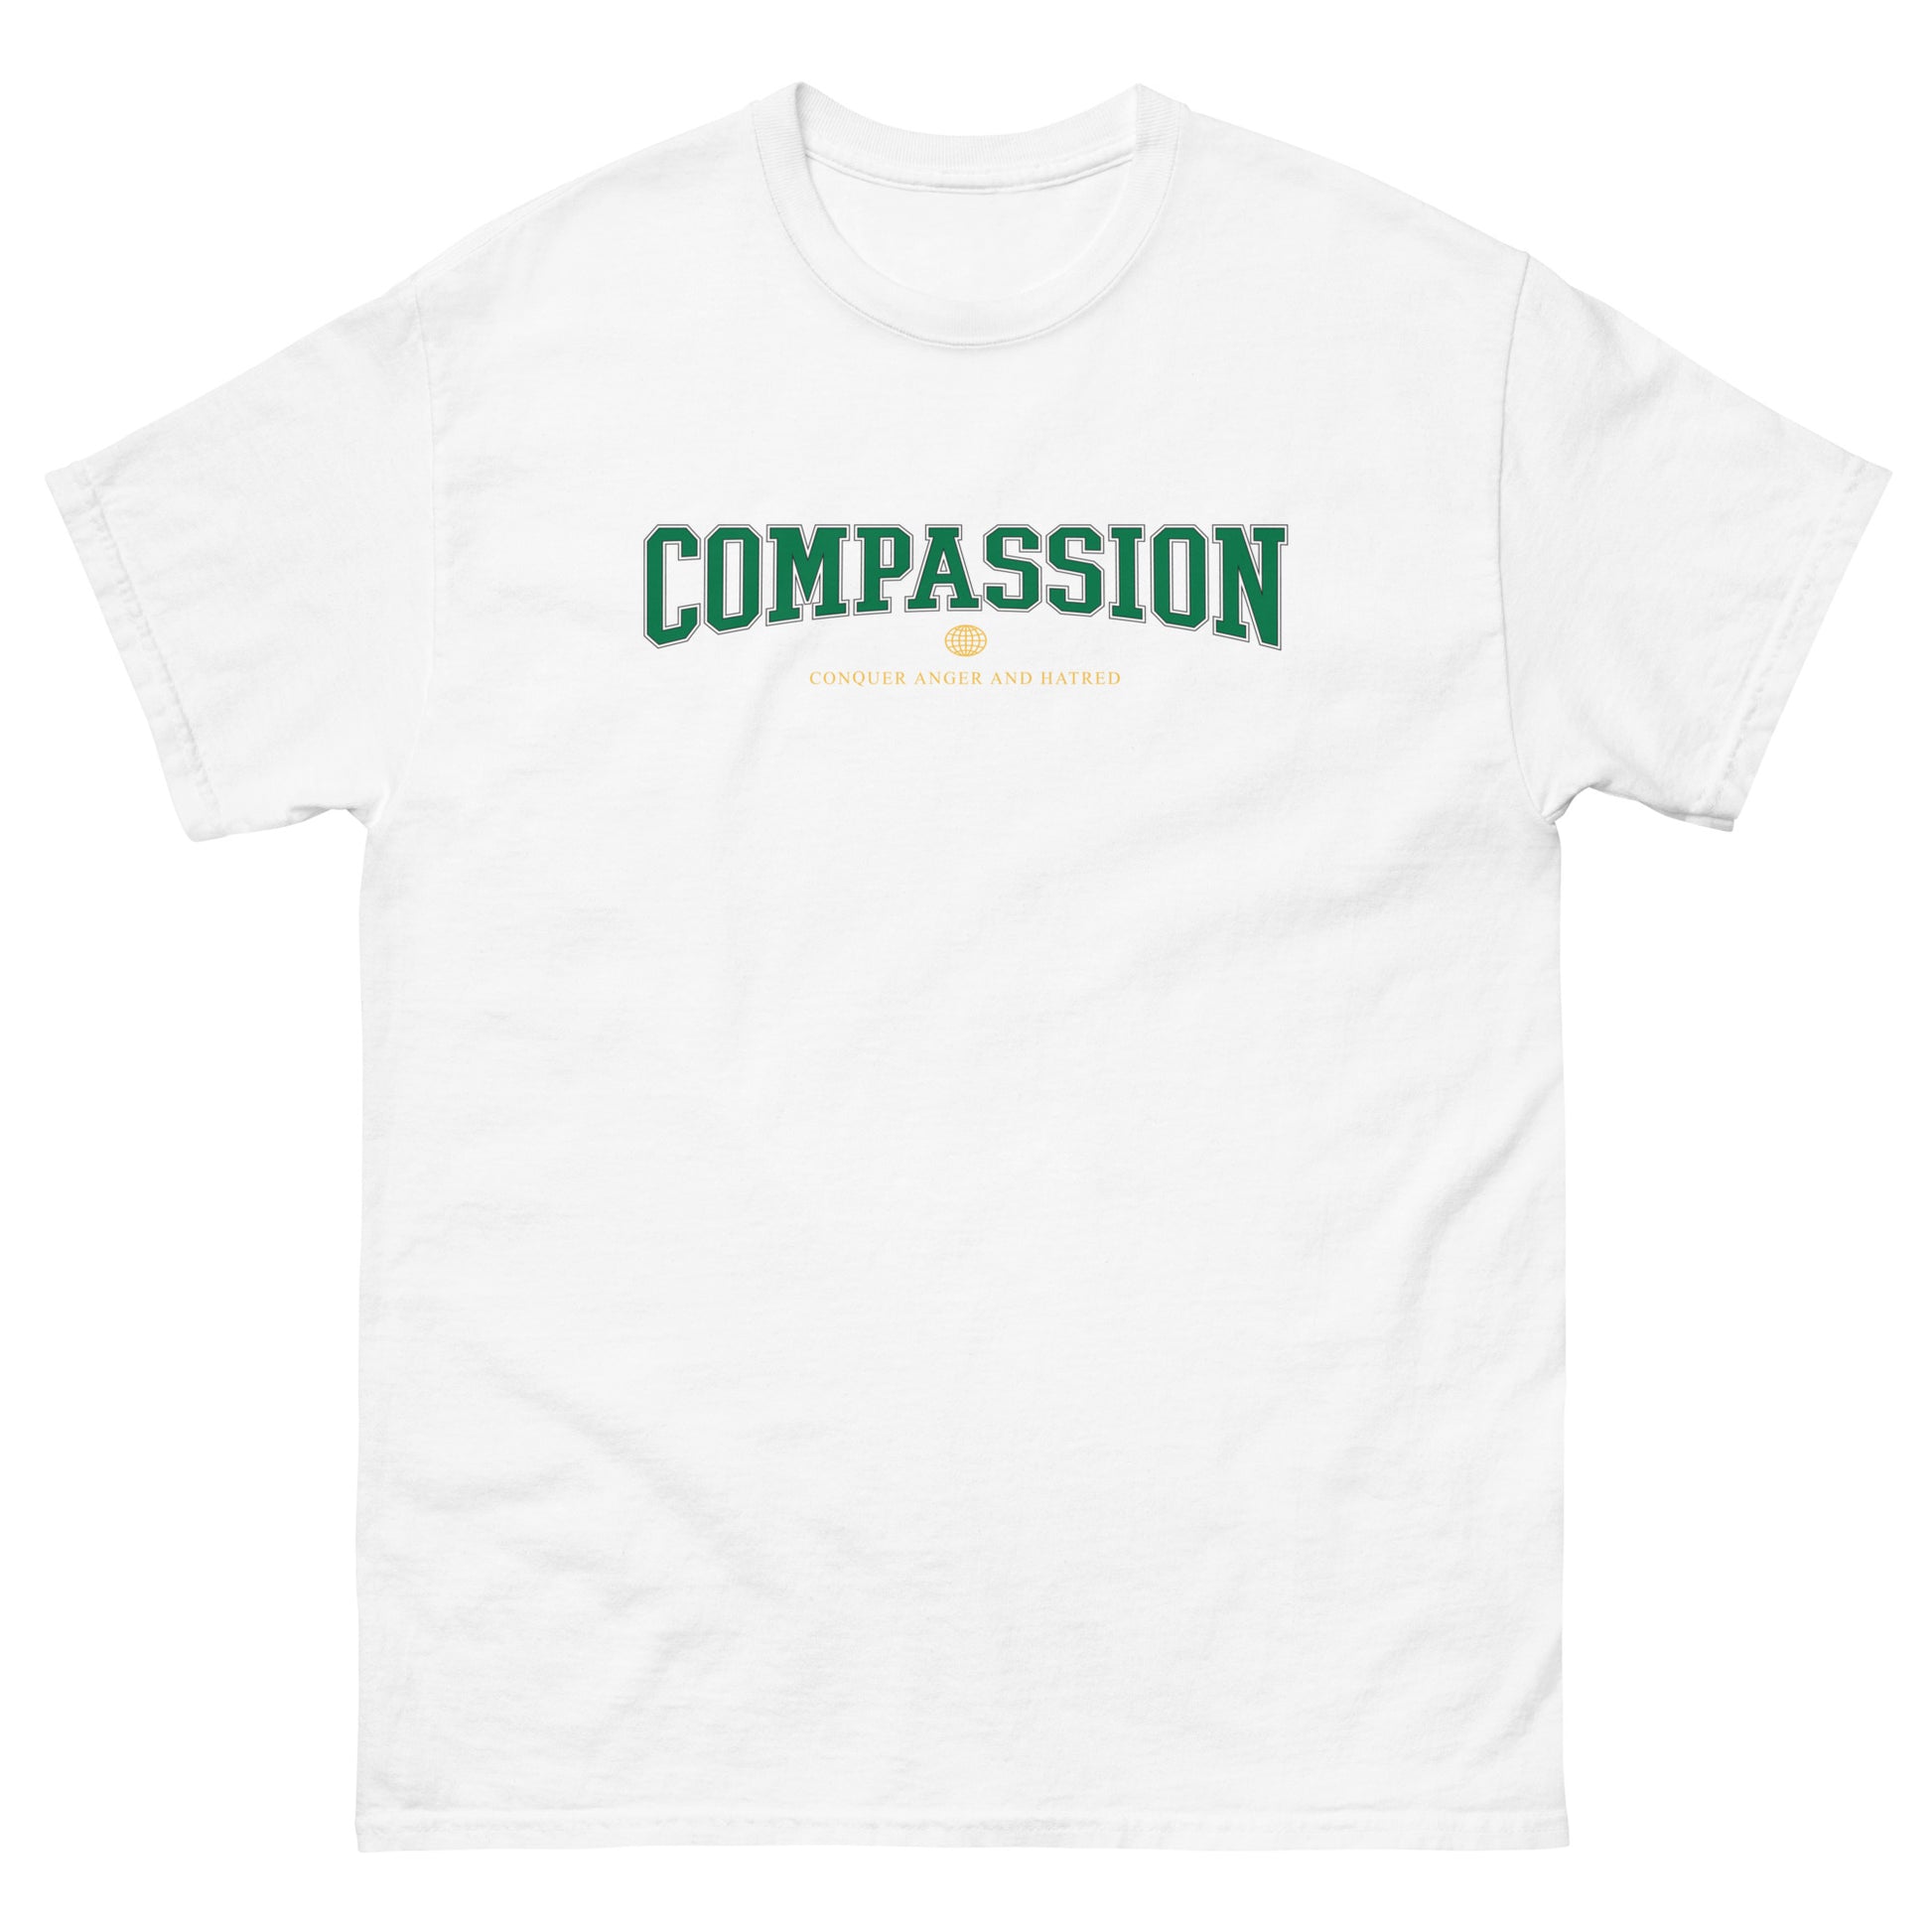 Dzimig Studios' Unisex Classic Compassion Tee perfect for everyday casual wear.  These tees are designed under Dzimig Studios' Peace Campaign Project.